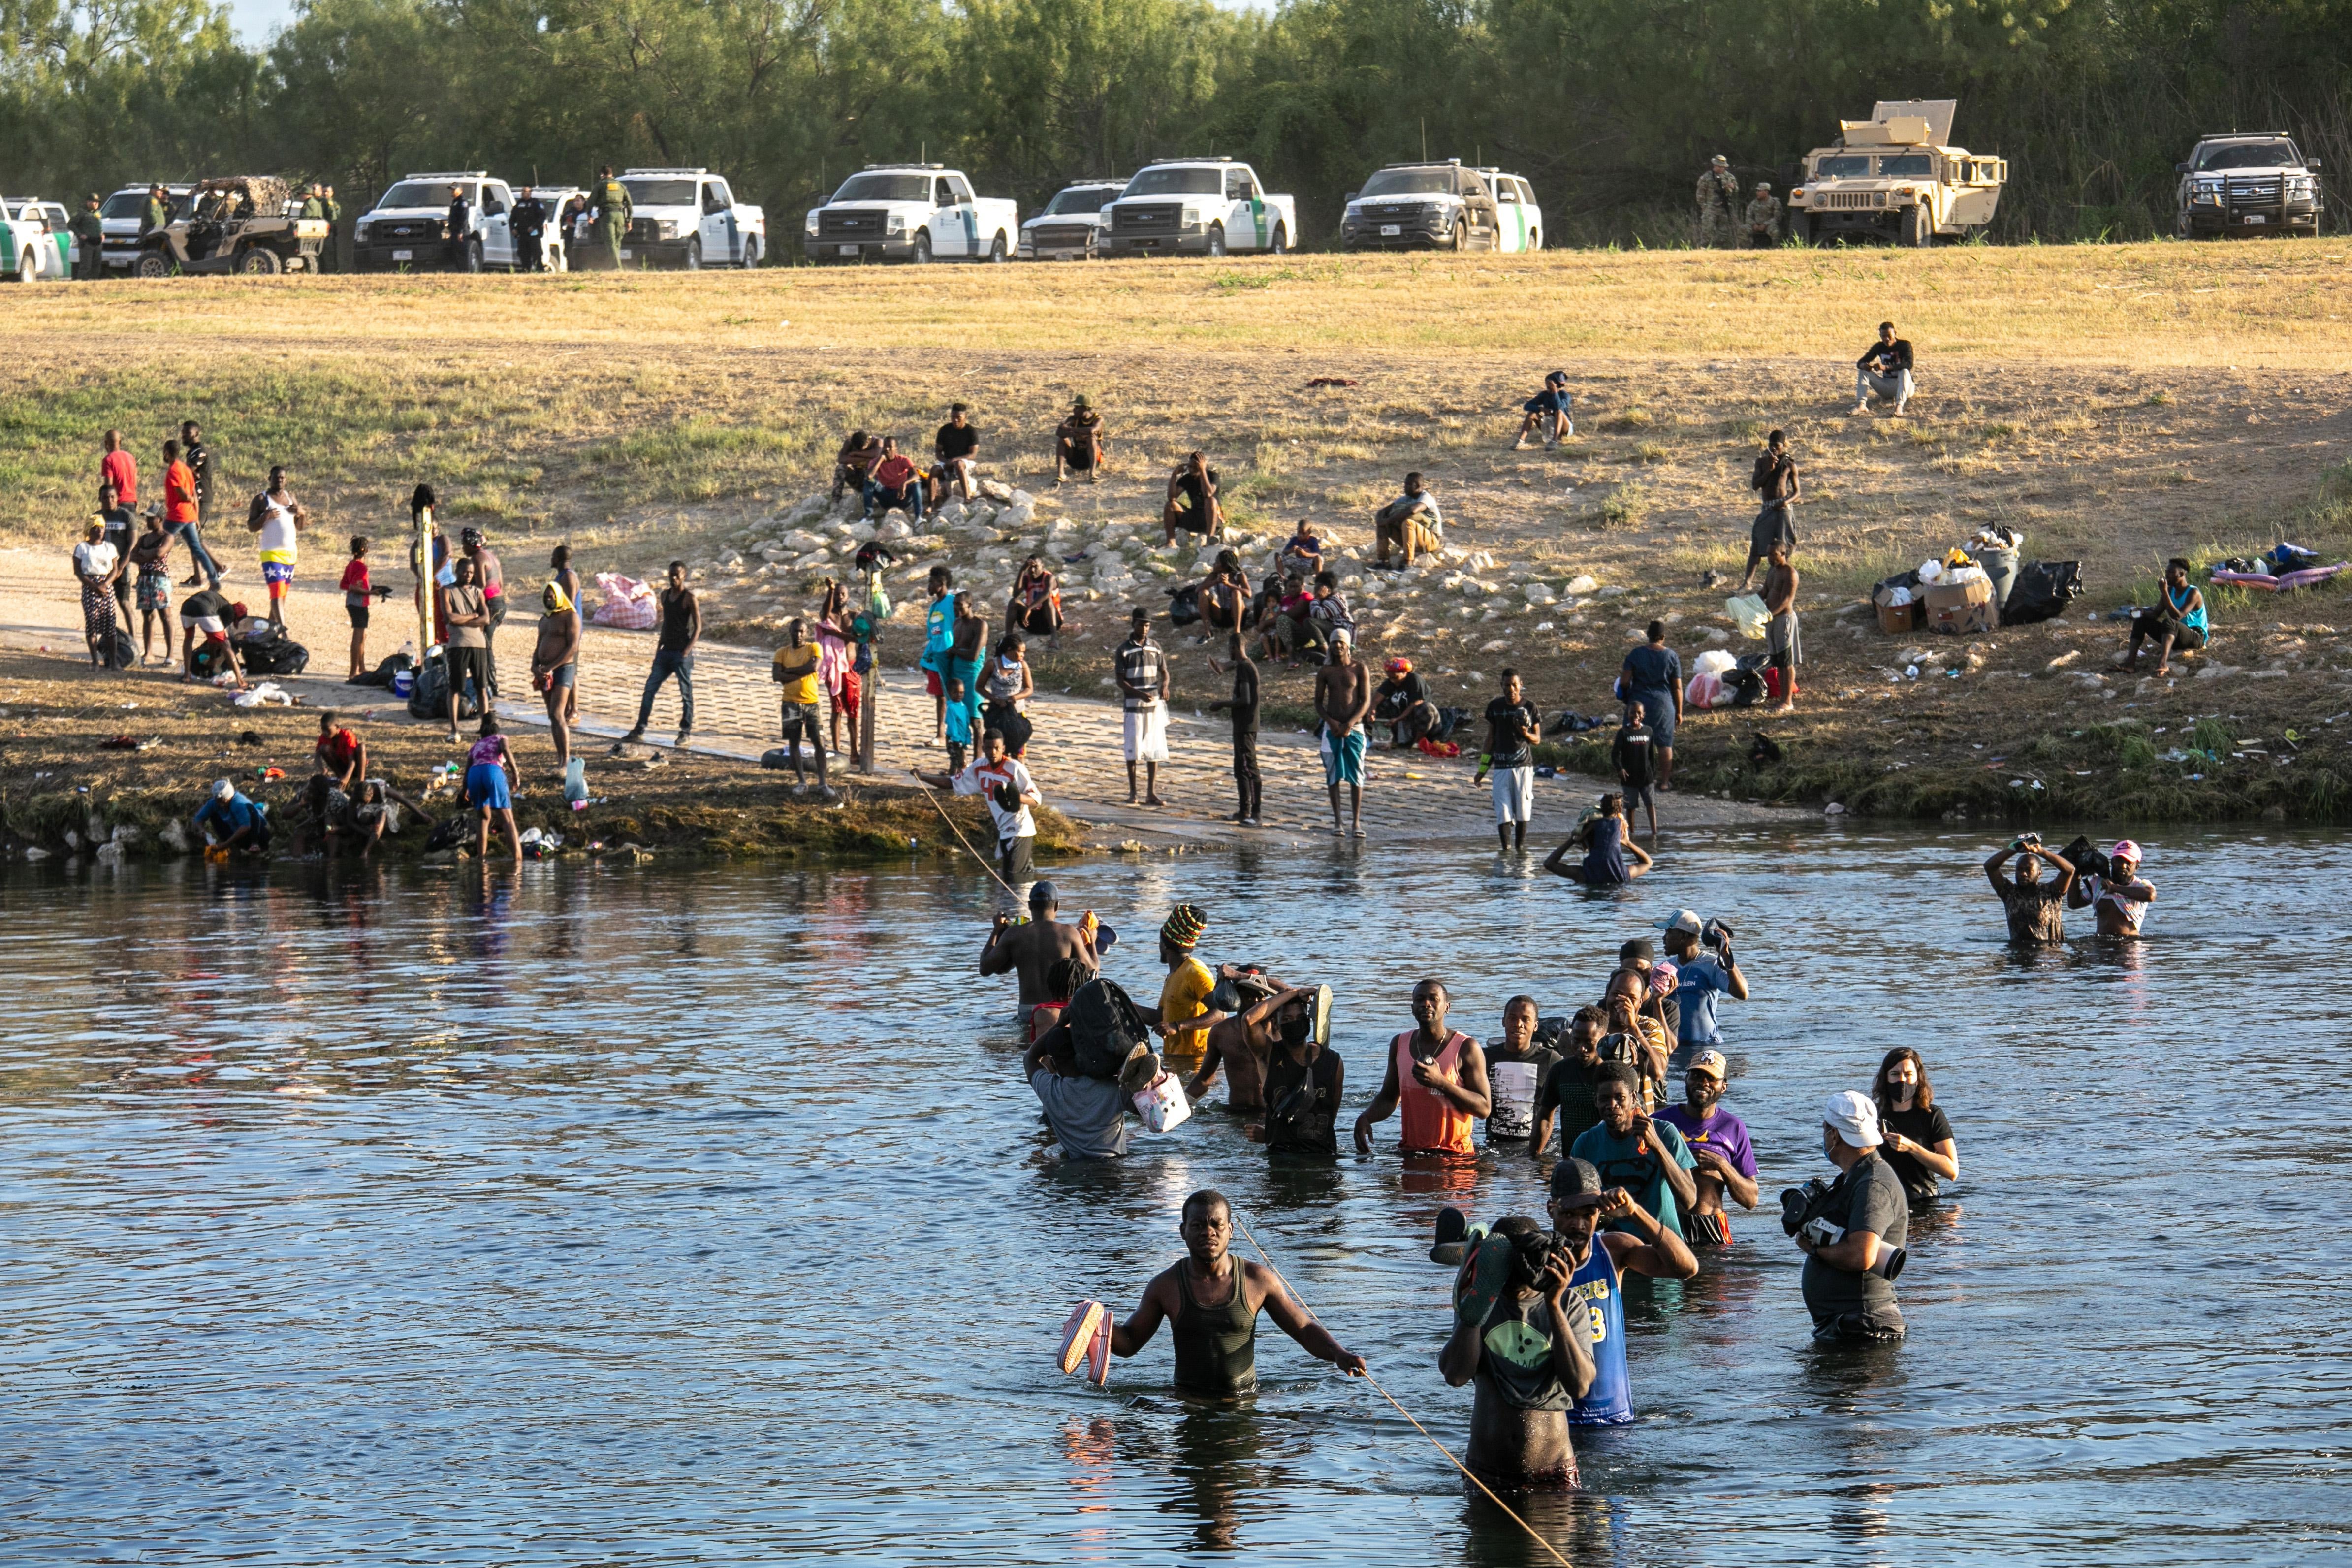 Haitian migrants standing in front of a body of water while others wade through it